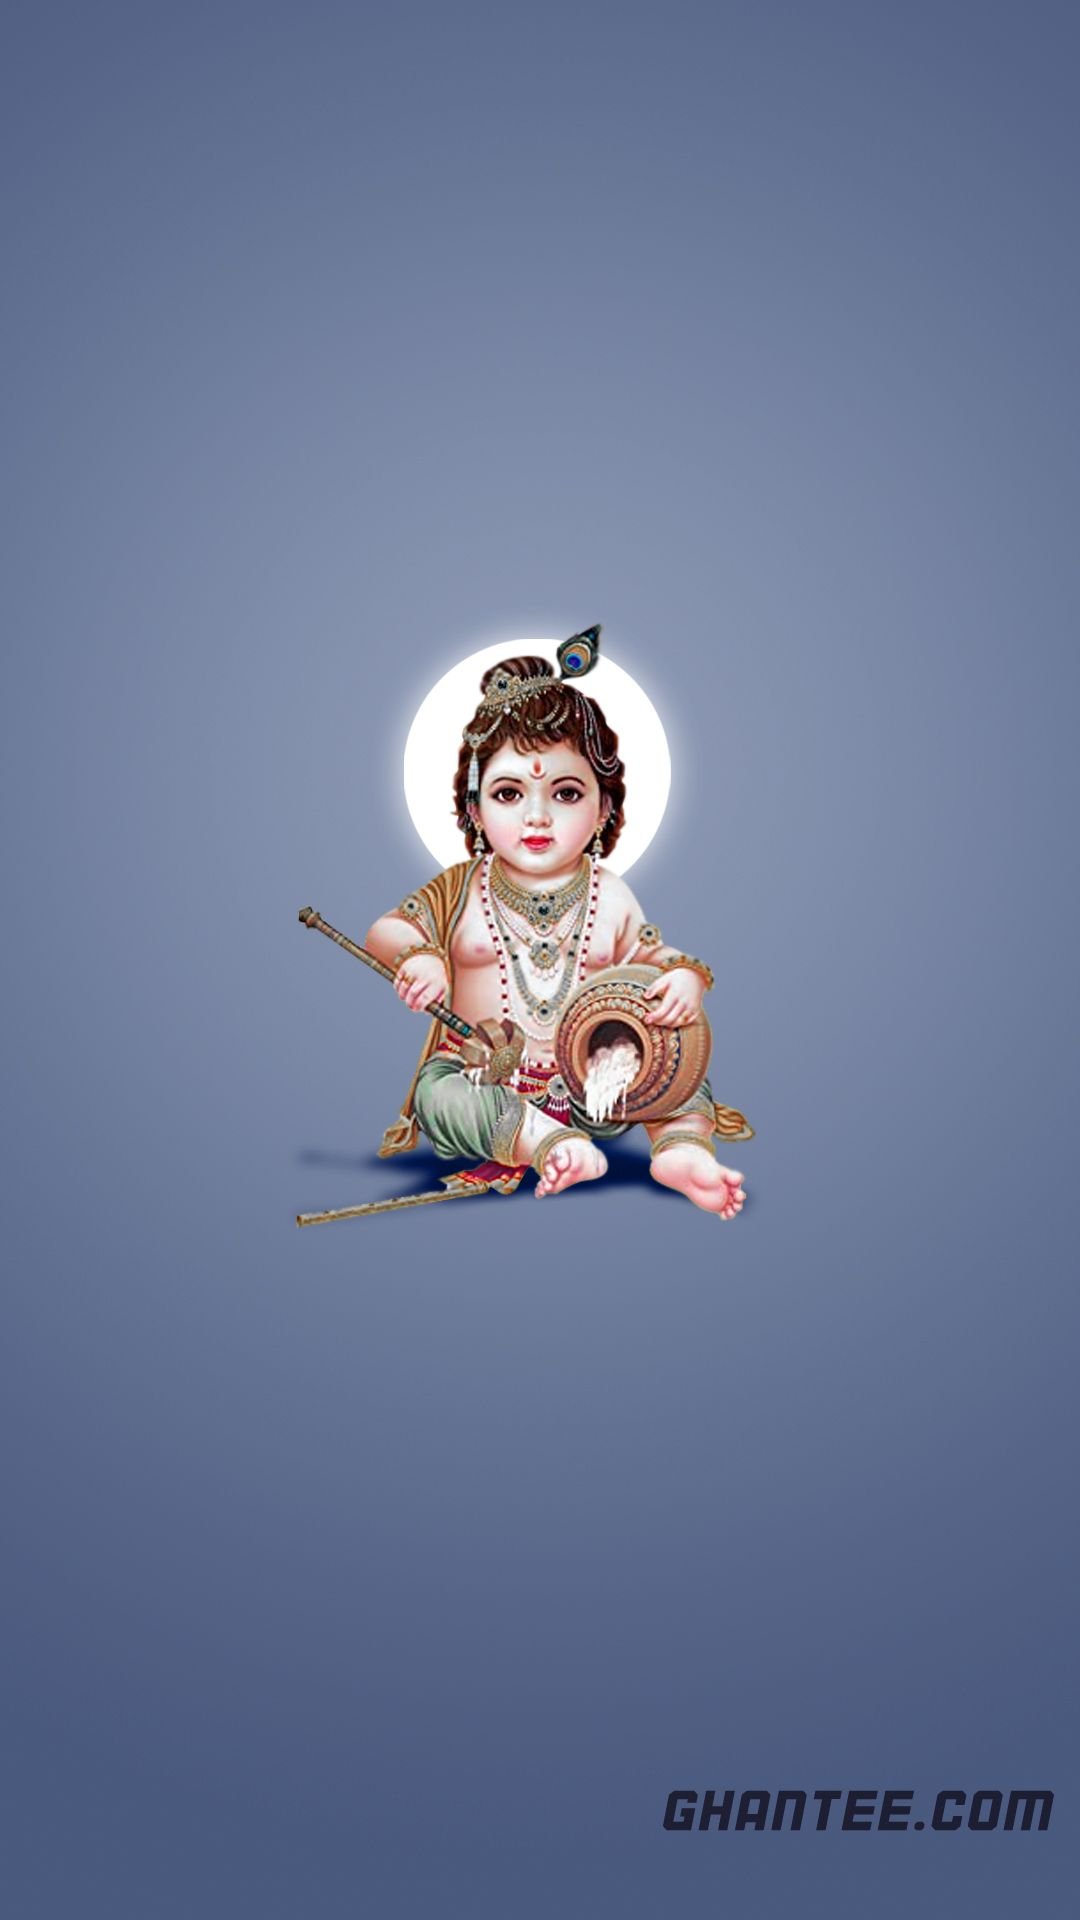 animated lord krishna wallpapers for mobile